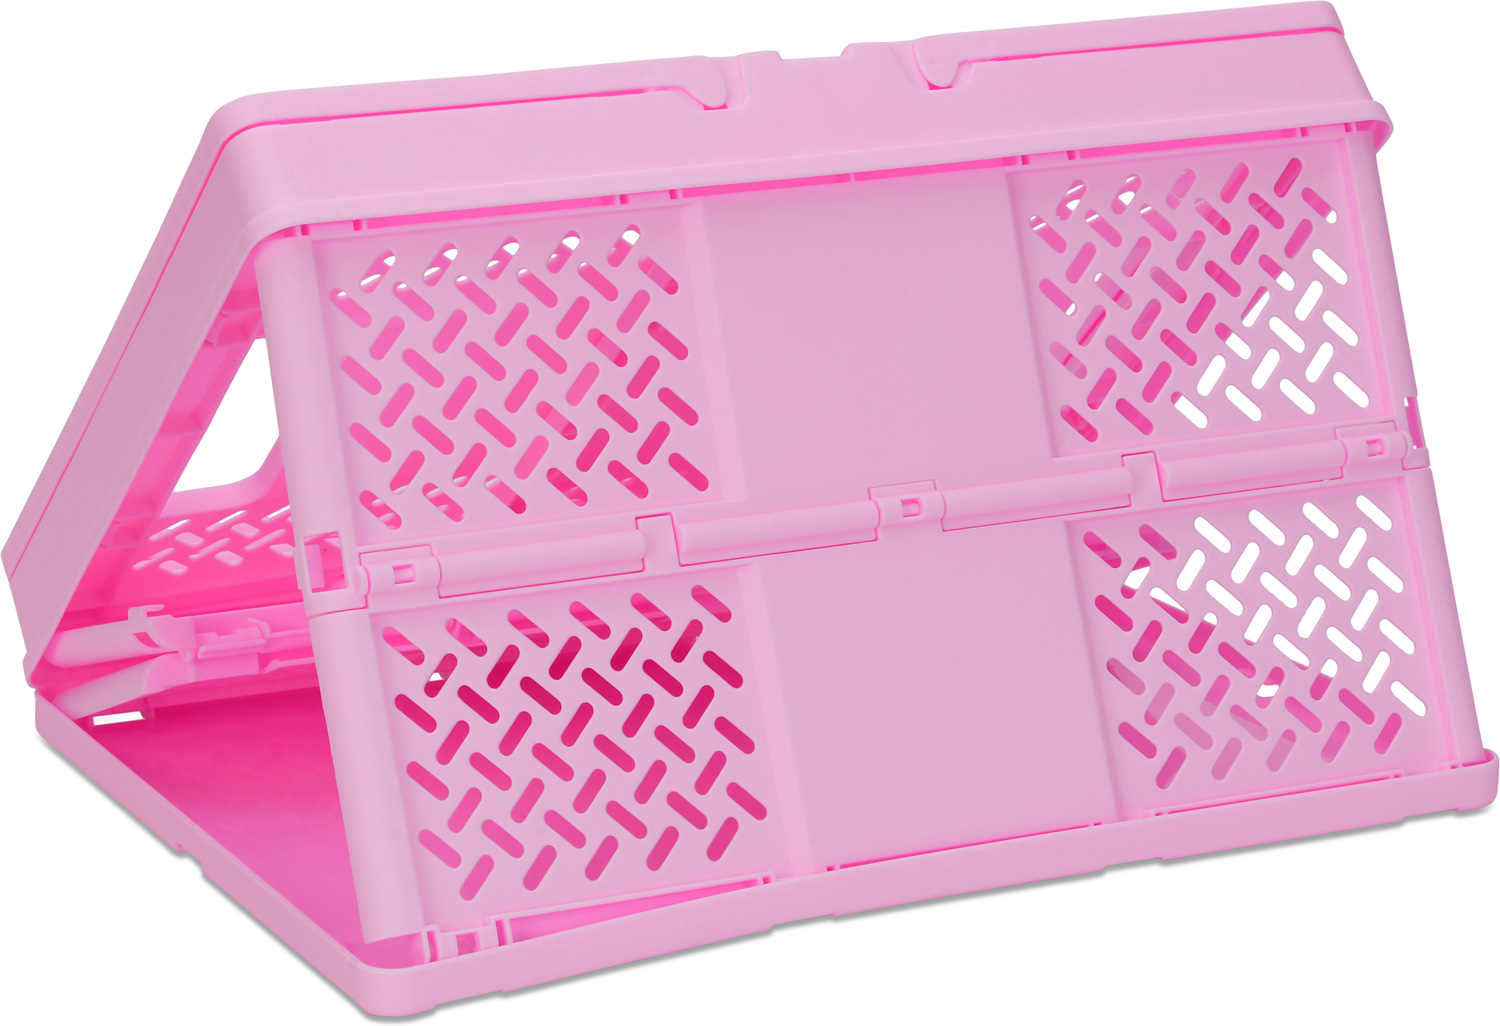 Pink Foldable Storage Crate Large